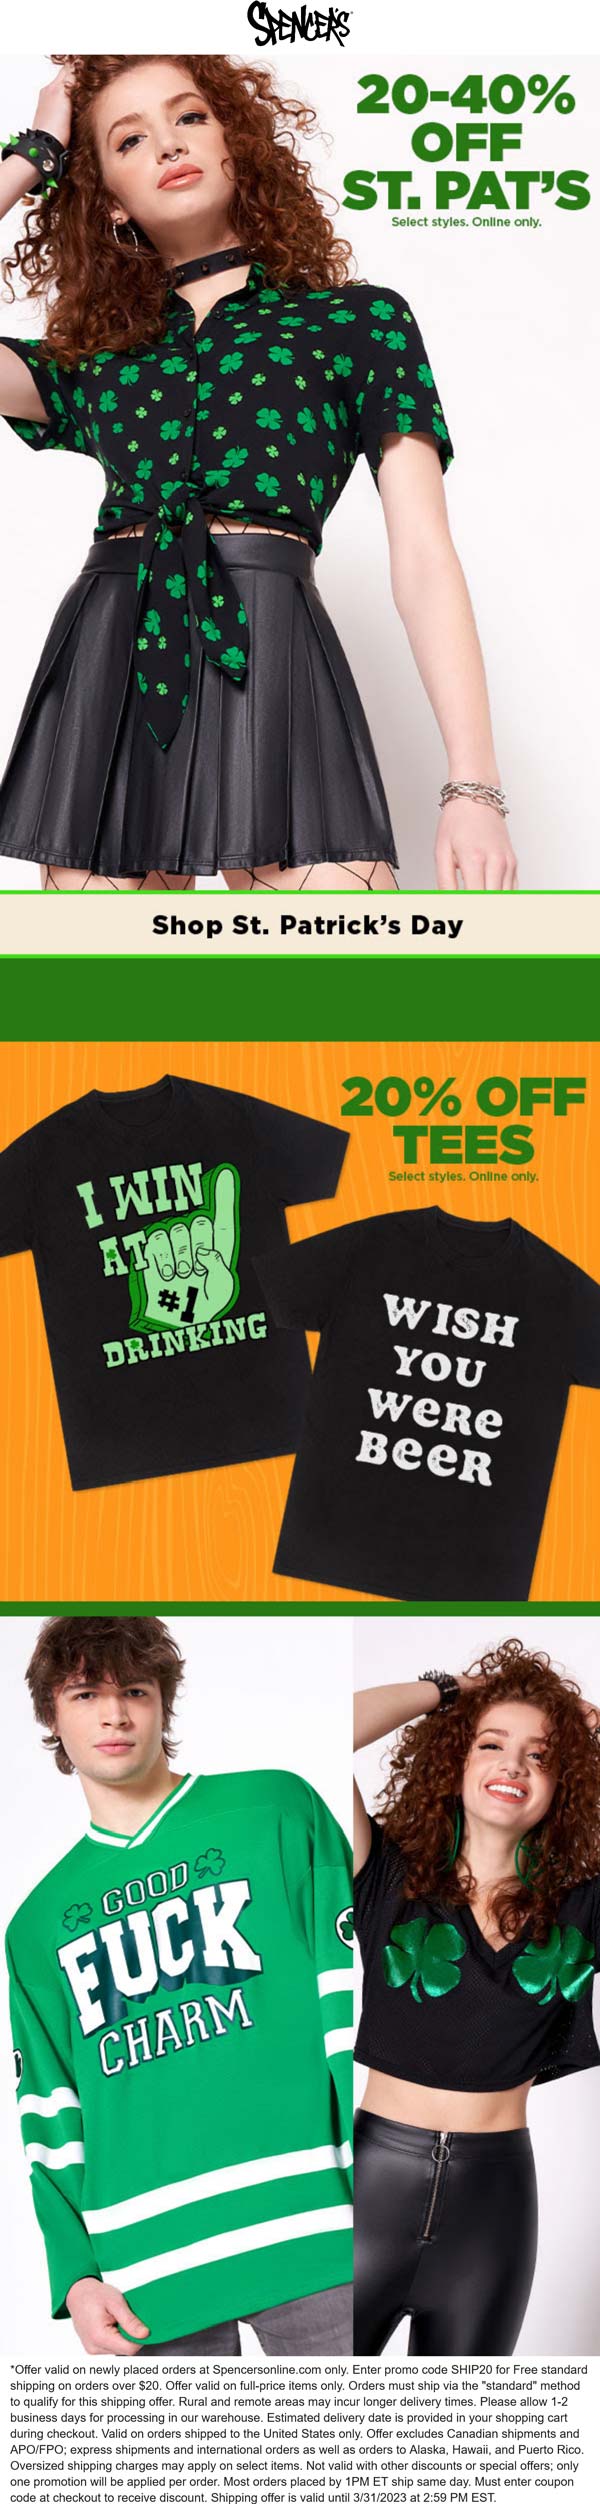 Spencers stores Coupon  20-40% off St Patricks day items online at Spencers with free shipping via promo code SHIP20 #spencers 